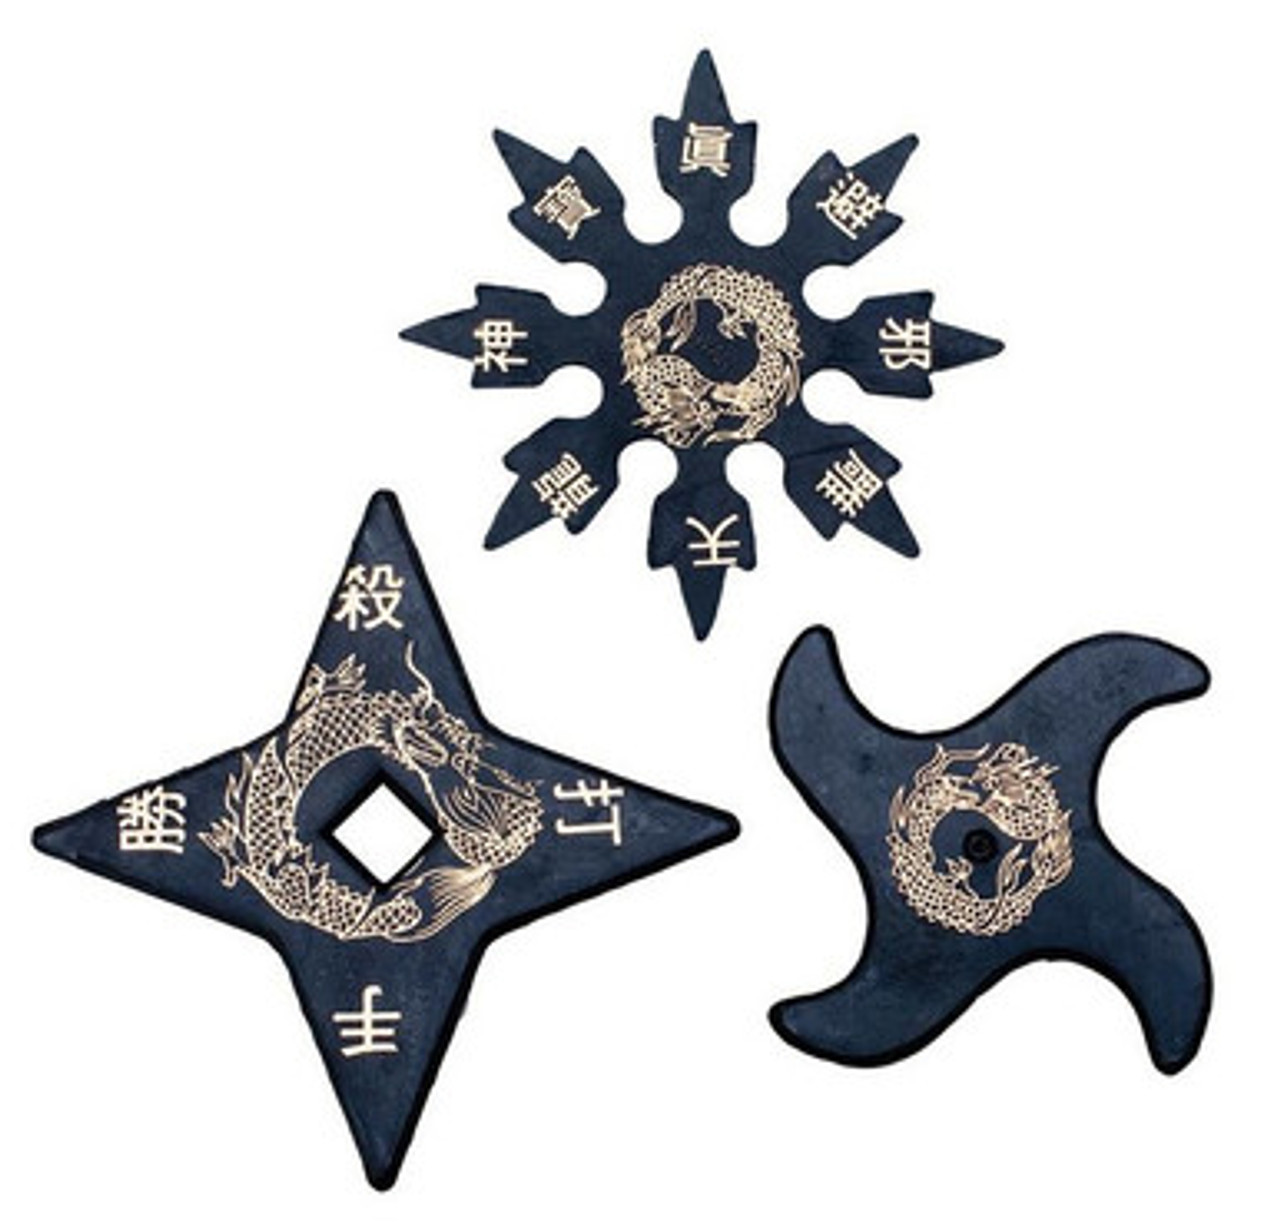  Lees Rubber Safety Ninja Star Set of 15 : Sports & Outdoors